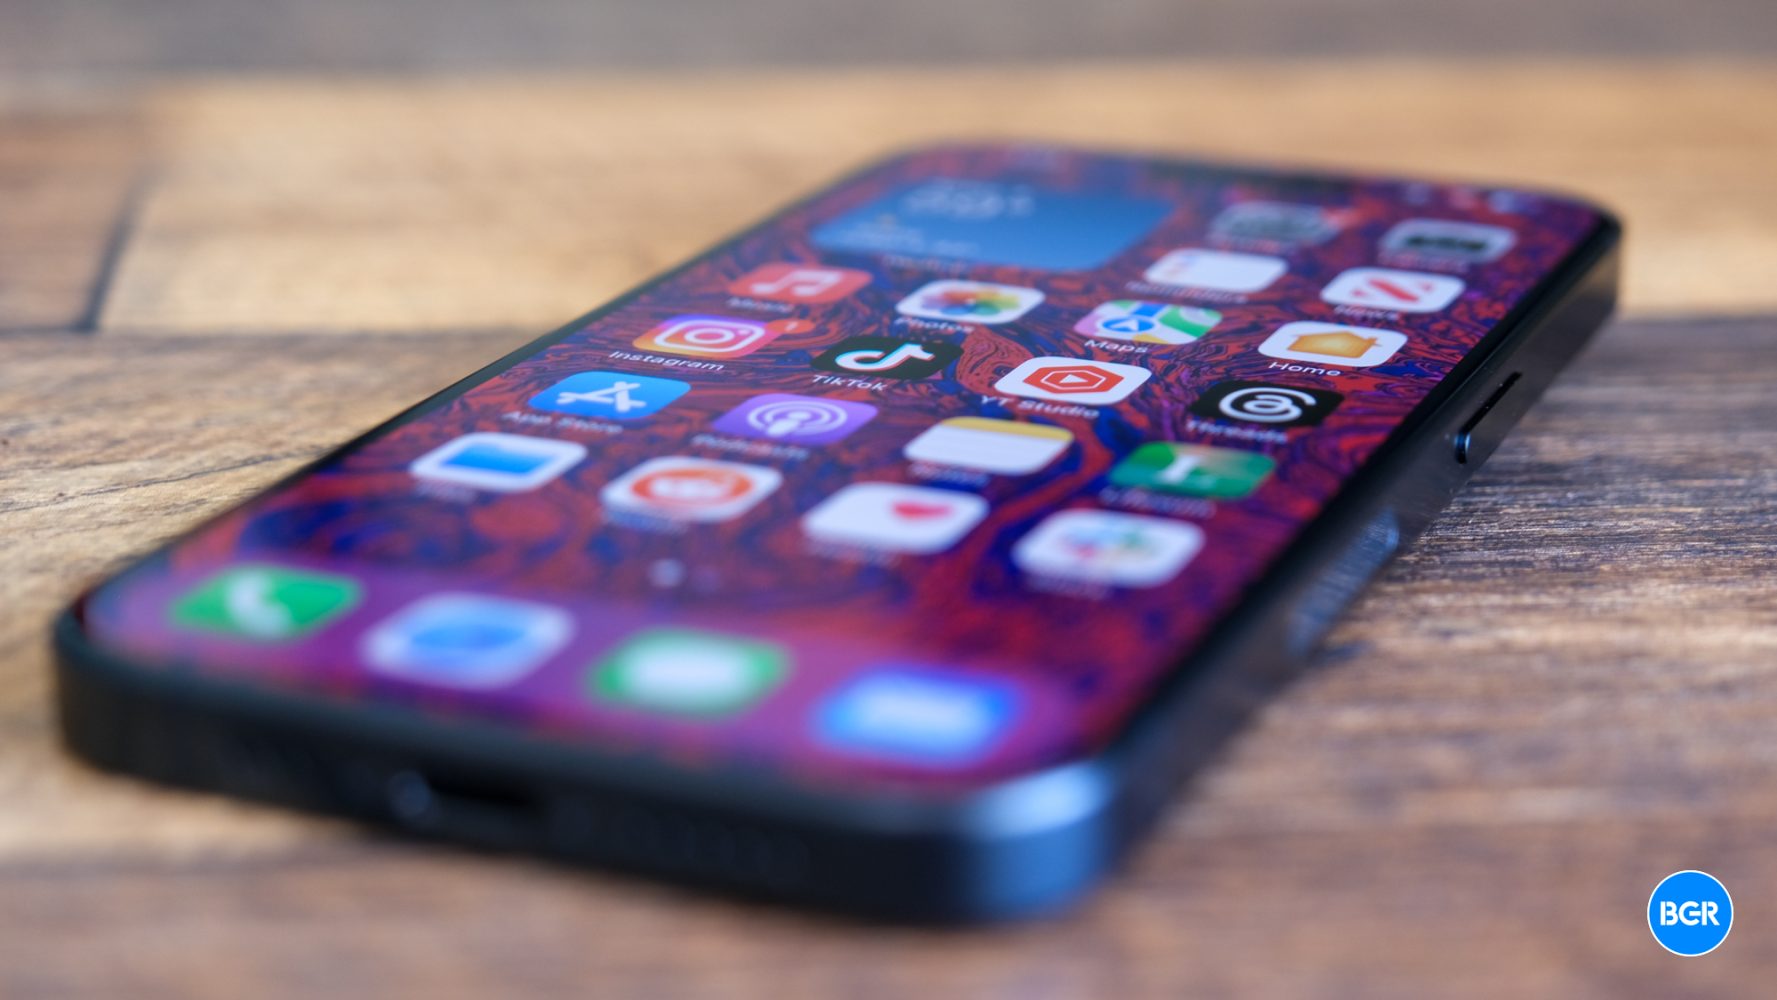 Gemini or ChatGPT might be built into the iPhone with iOS 18